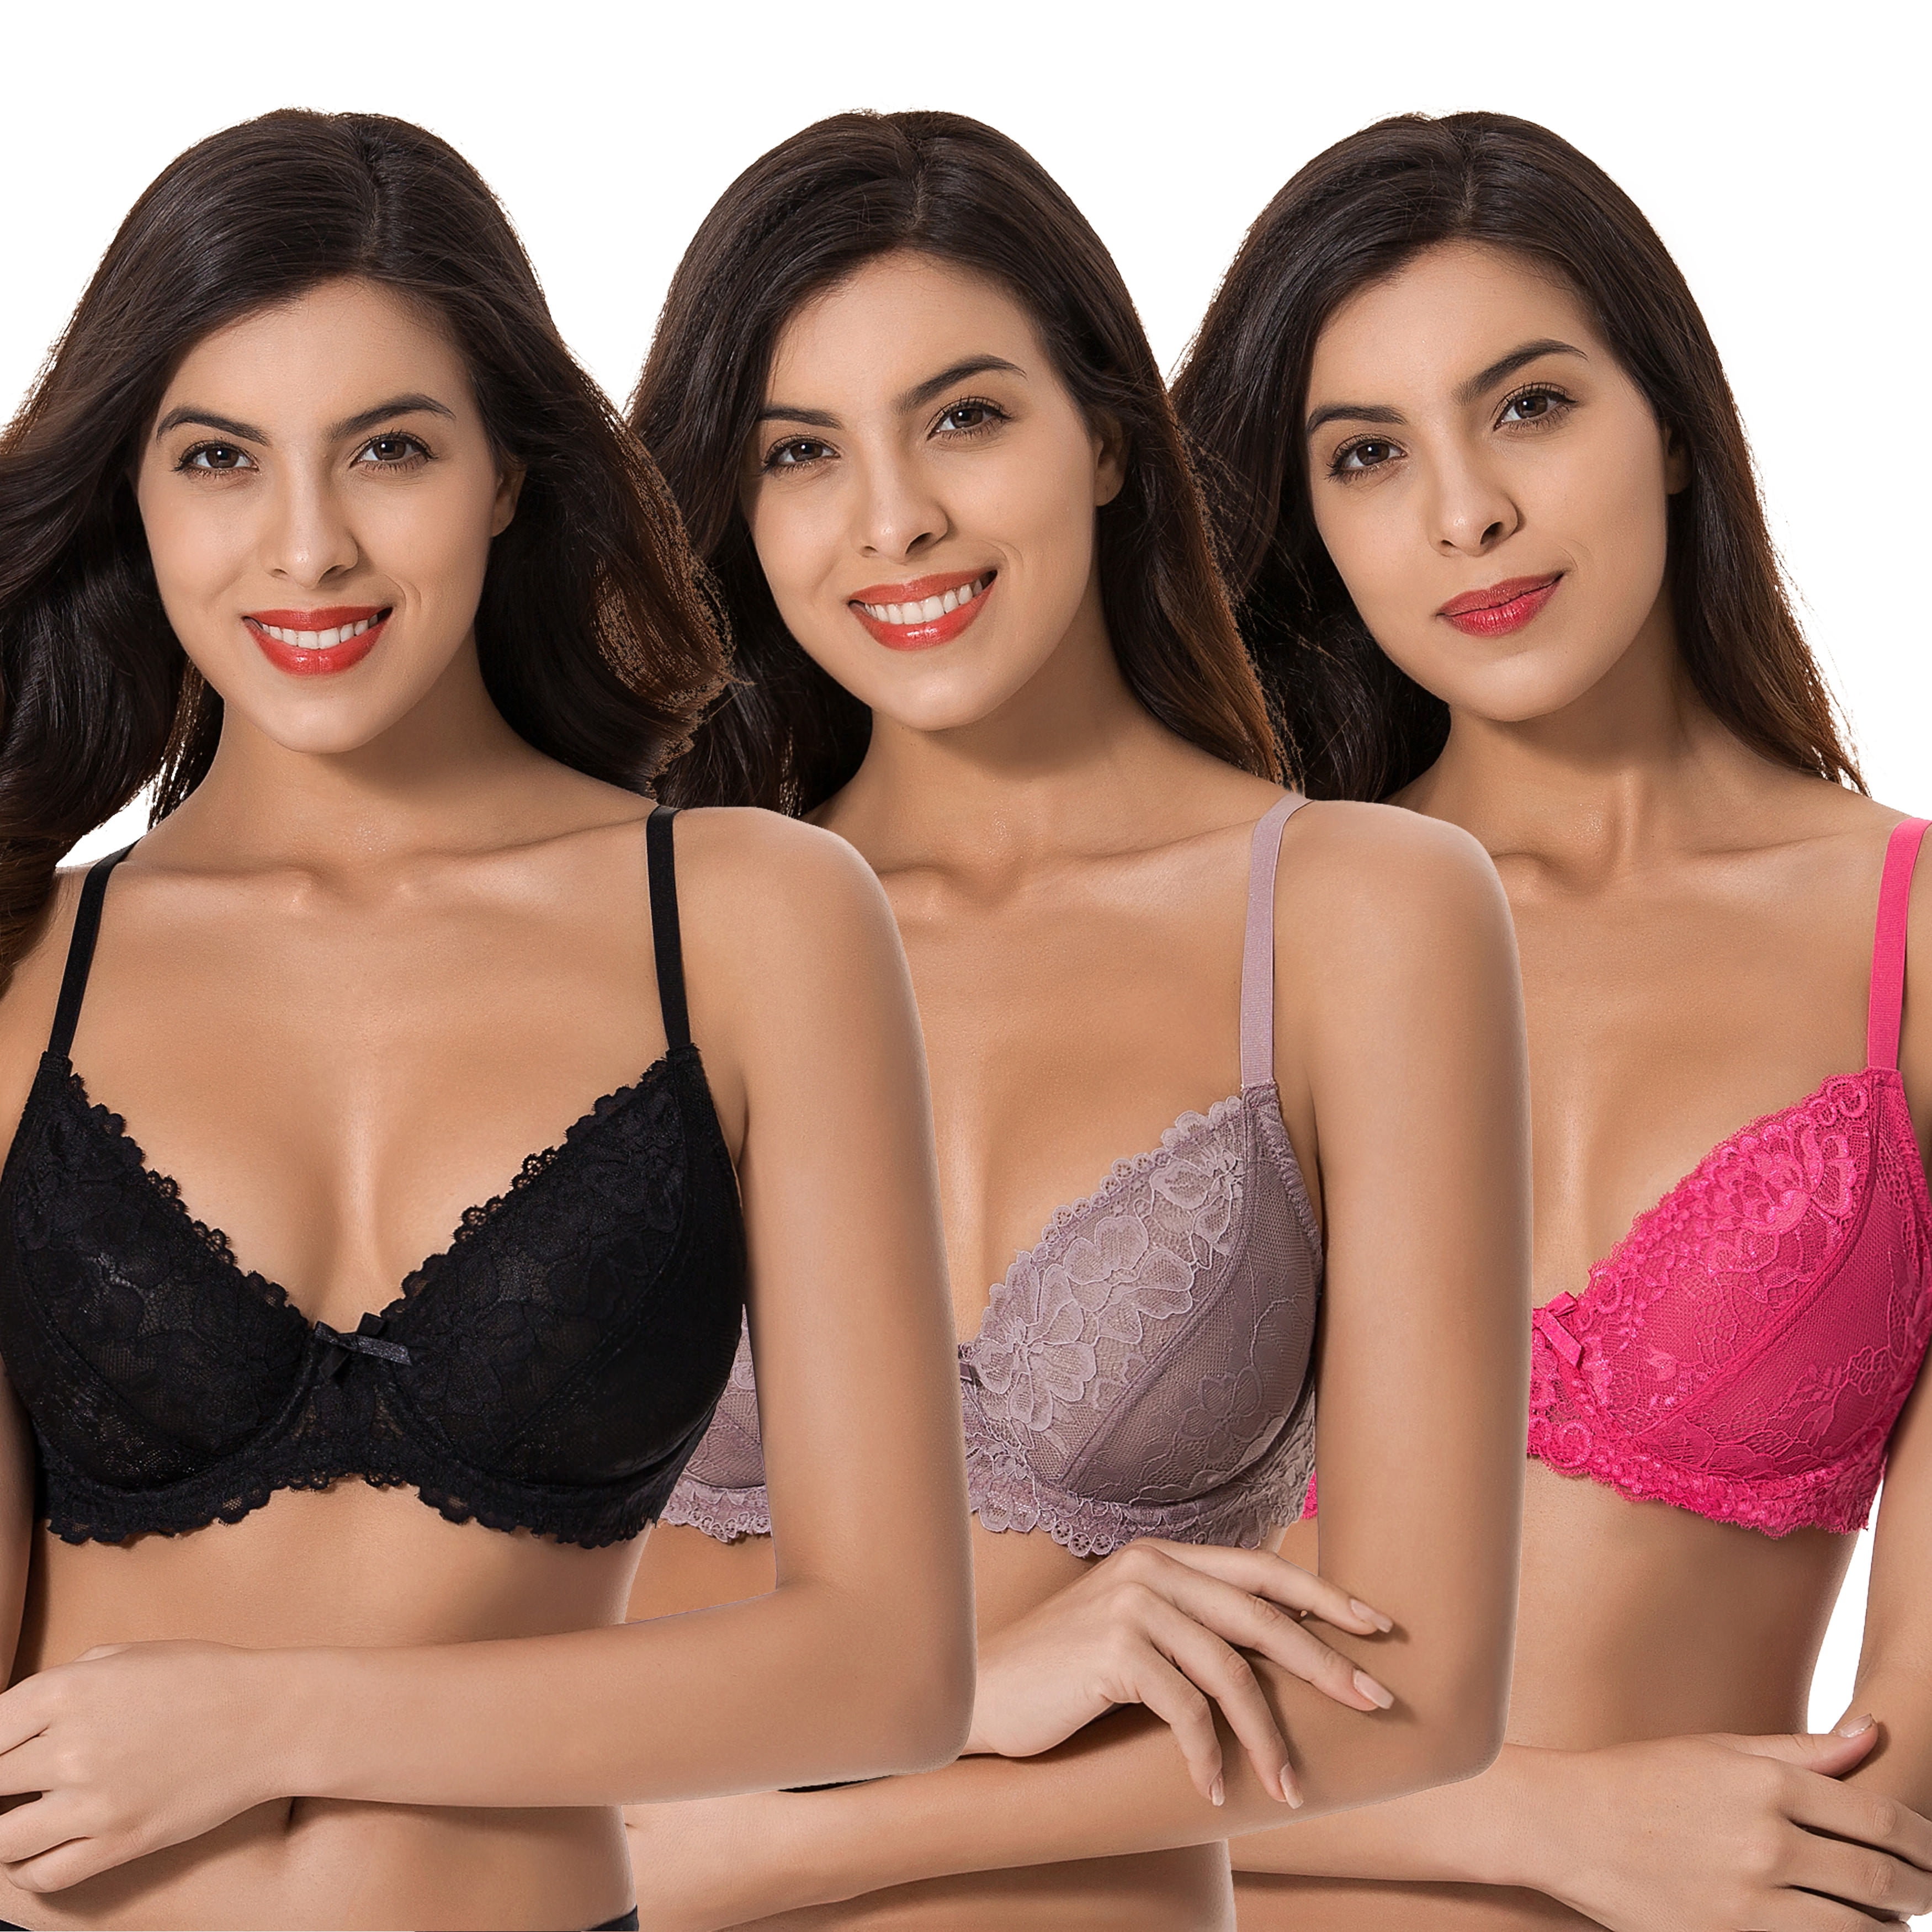 Curve Muse Semi-Sheer Balconette Underwire Lace Bra and Scalloped Hems (3  Pack)-BLACK,ROSE,MAUVE-48D